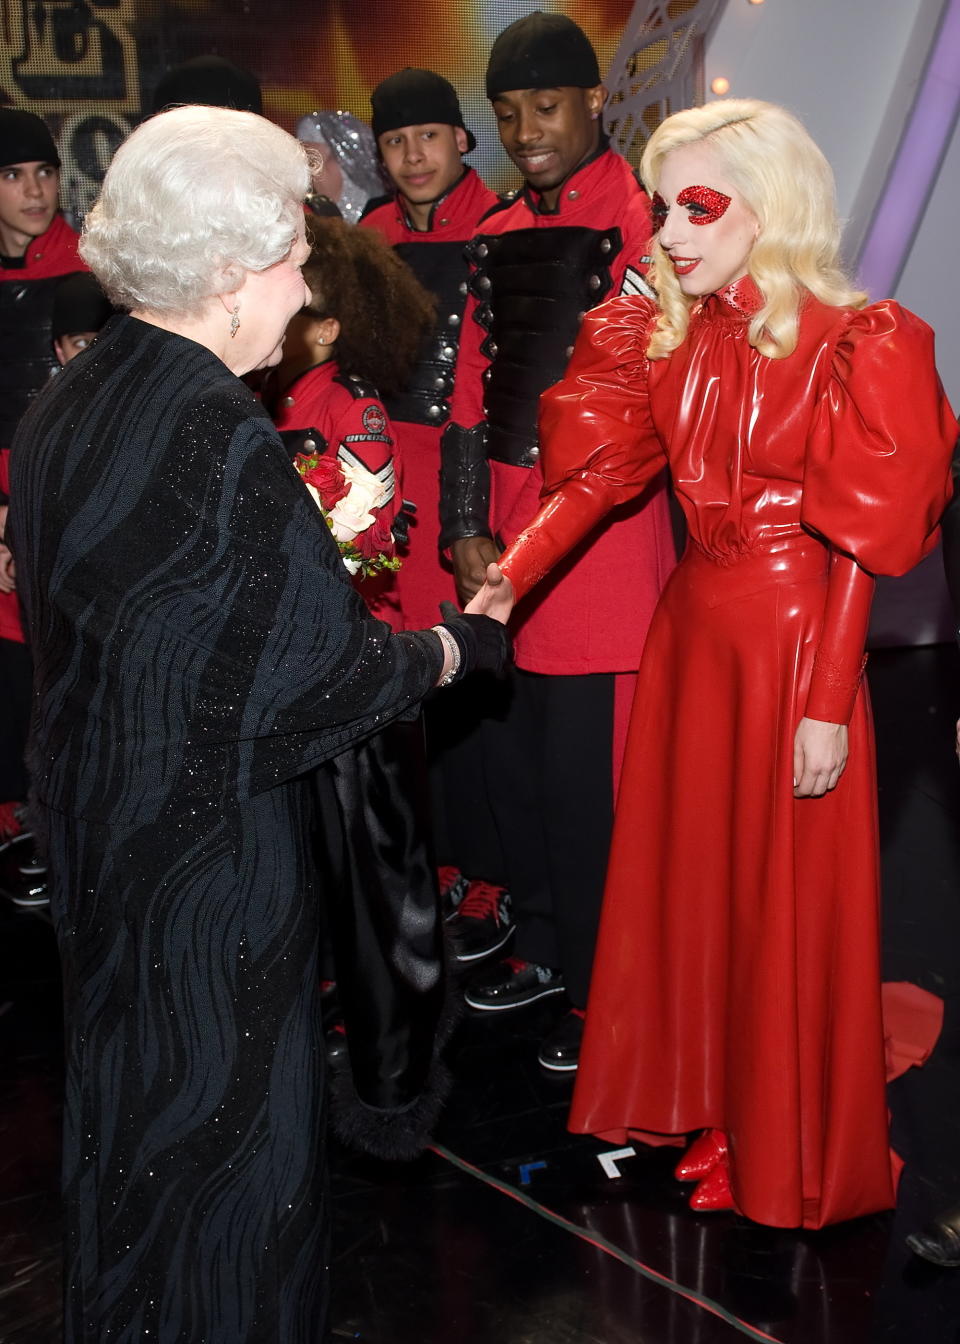 BLACKPOOL, ENGLAND - DECEMBER 7: Queen Elizabeth II  meets American singer Lady Gaga following the Royal Variety Performance on December 7, 2009 in Blackpool, England. (Photo by Anwar Hussein/Getty Images)